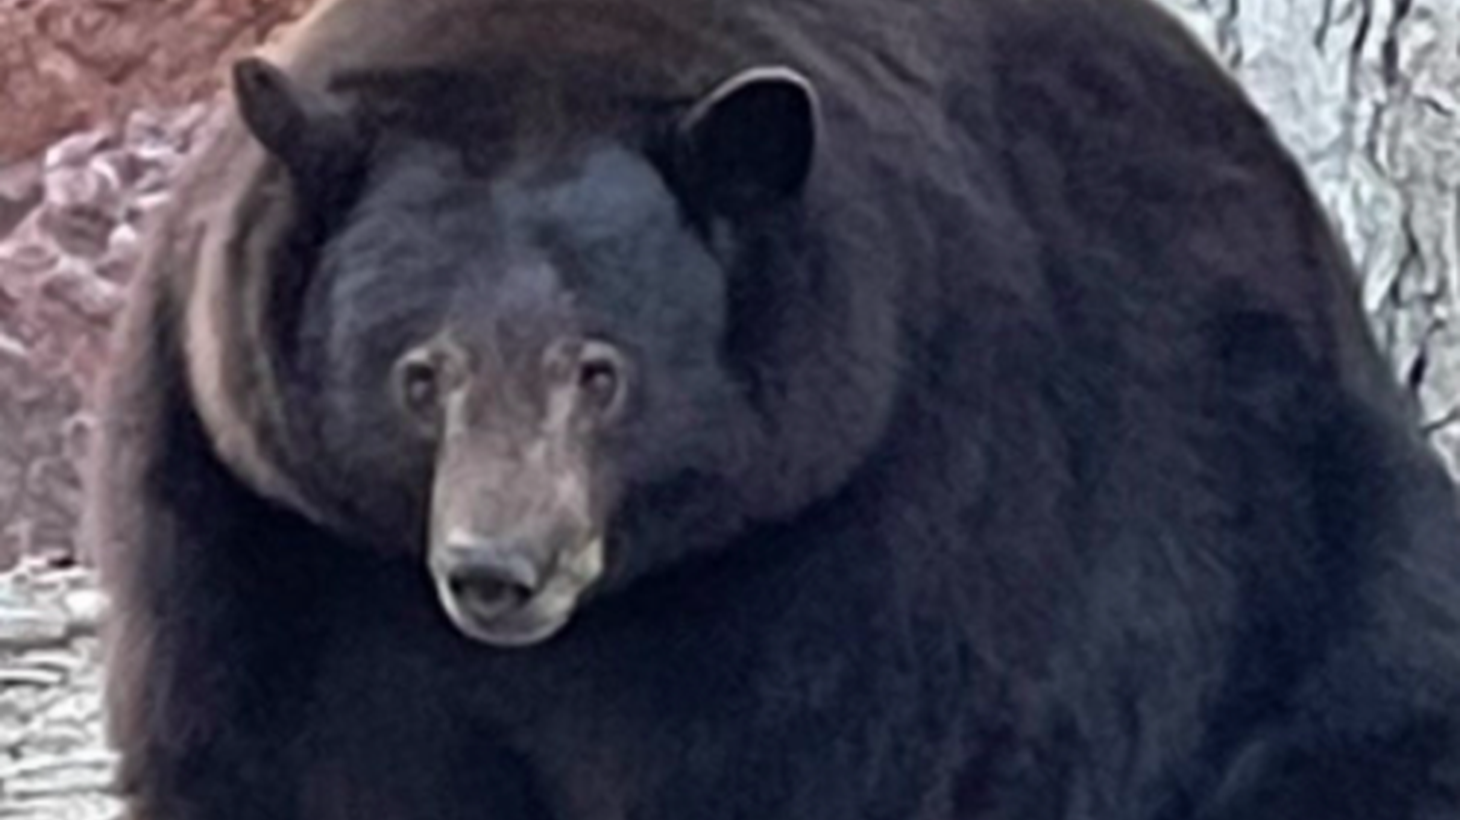 South Lake Tahoe resident “Hank the Tank” is a 500-pound black bear known for breaking into his neighbors’ refrigerators.